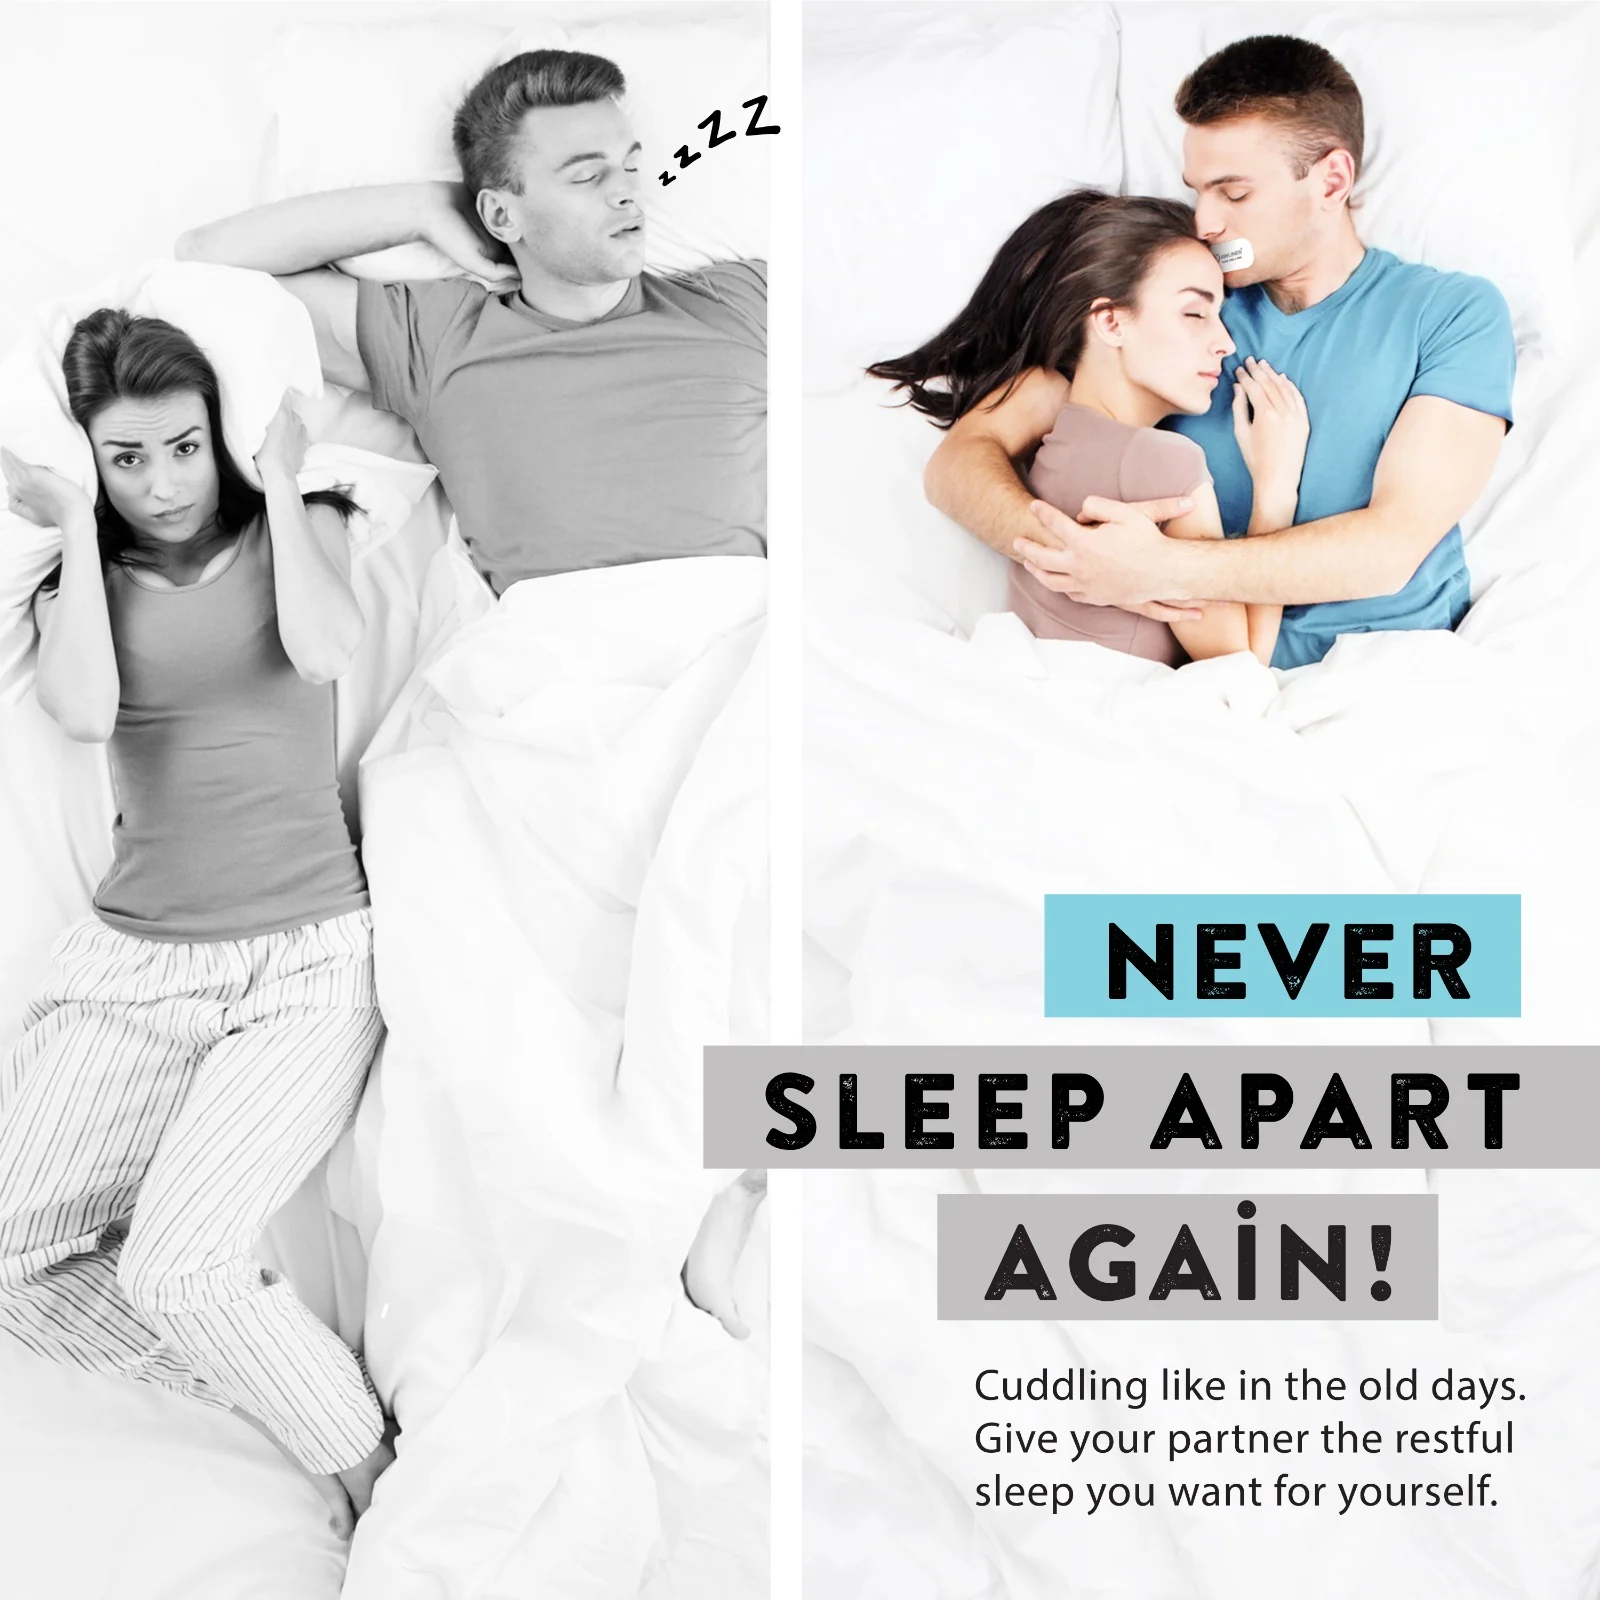 Jawliner mouth tape reduces snoring and improves sleeping quality